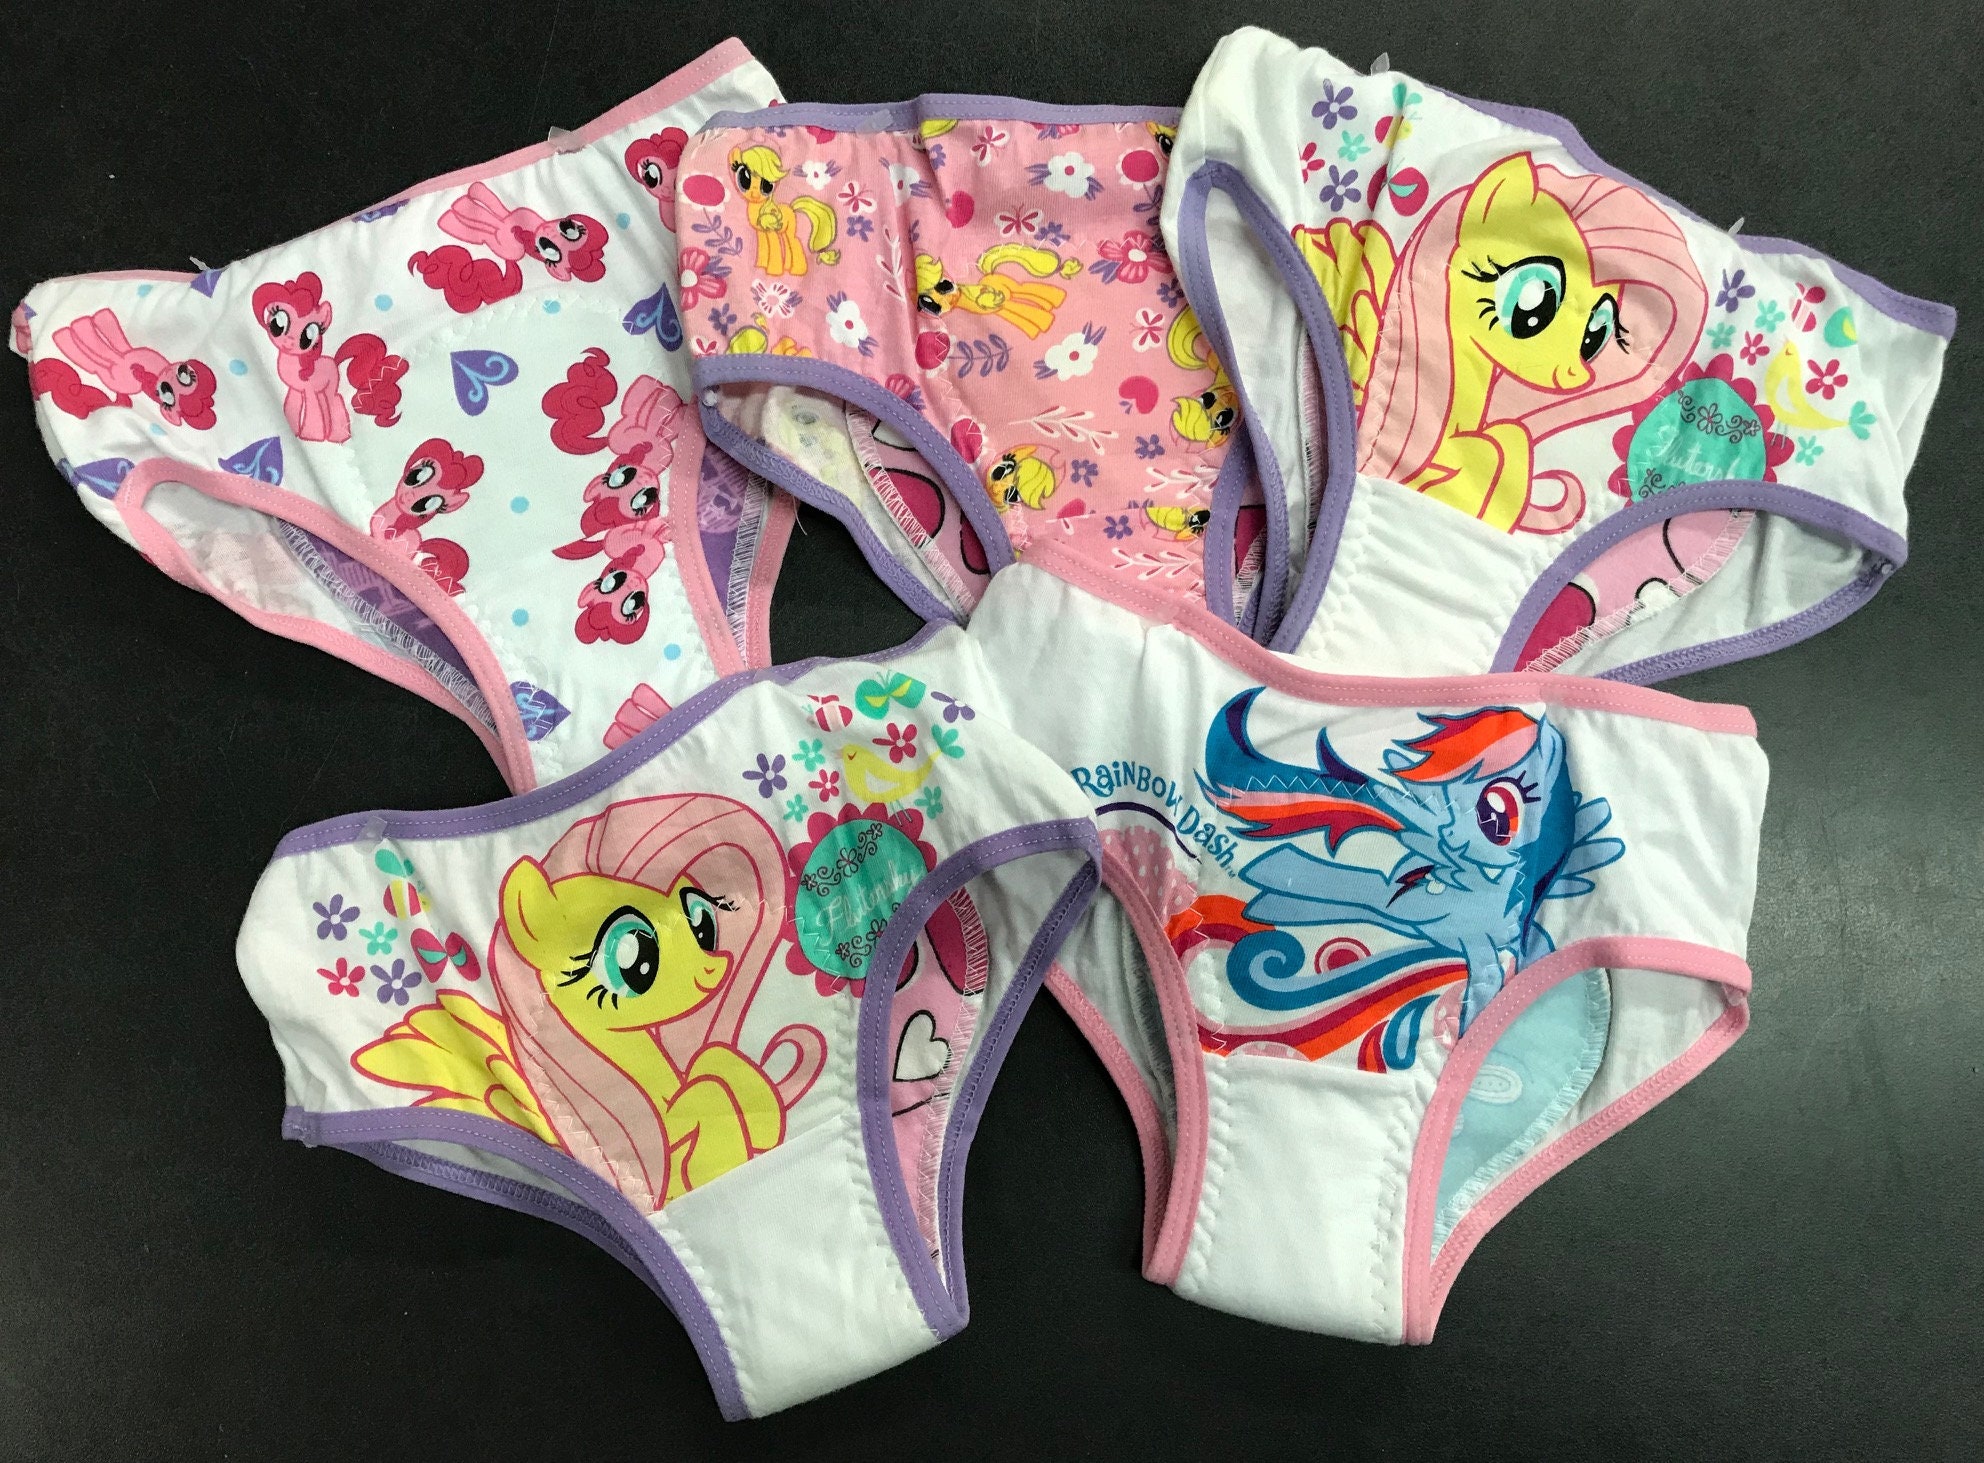 My Little Pony Theme Reusable Absorbent Cloth Training Pants Underwear  5-pack of Toddler Size 4 Washable 